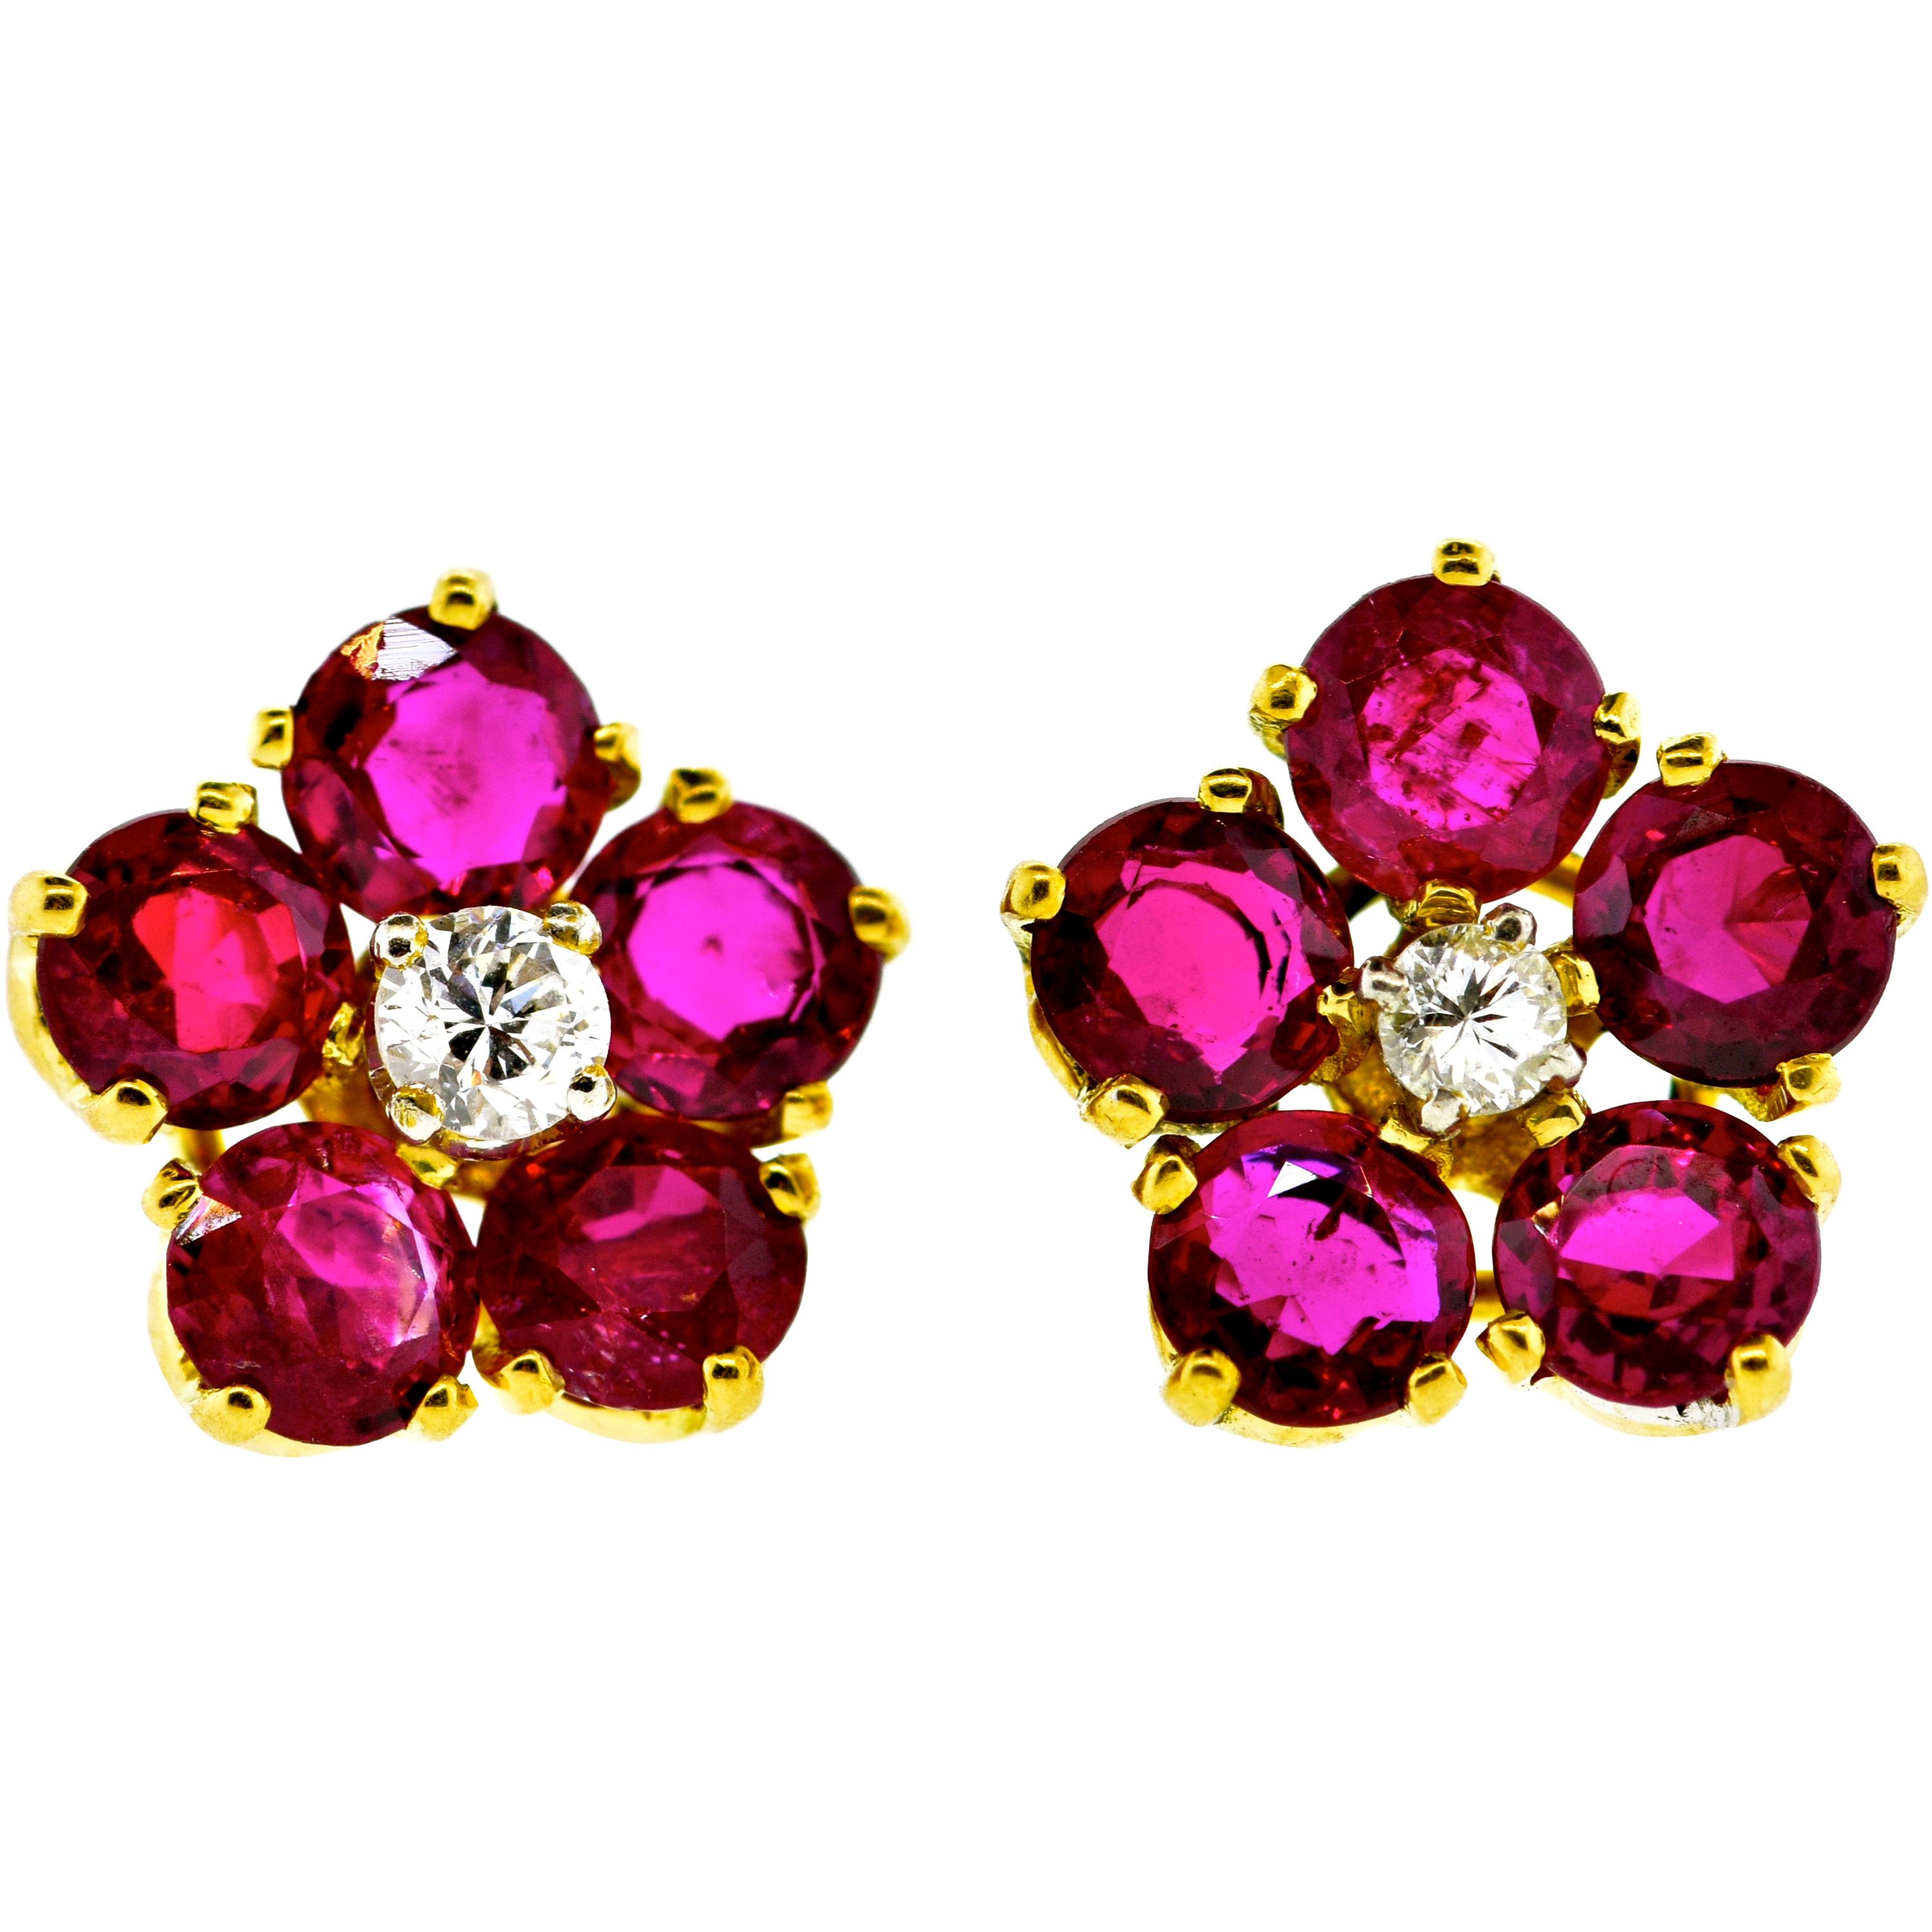 Contemporary Burma Ruby and Diamond Earrings by Pierre/Famille